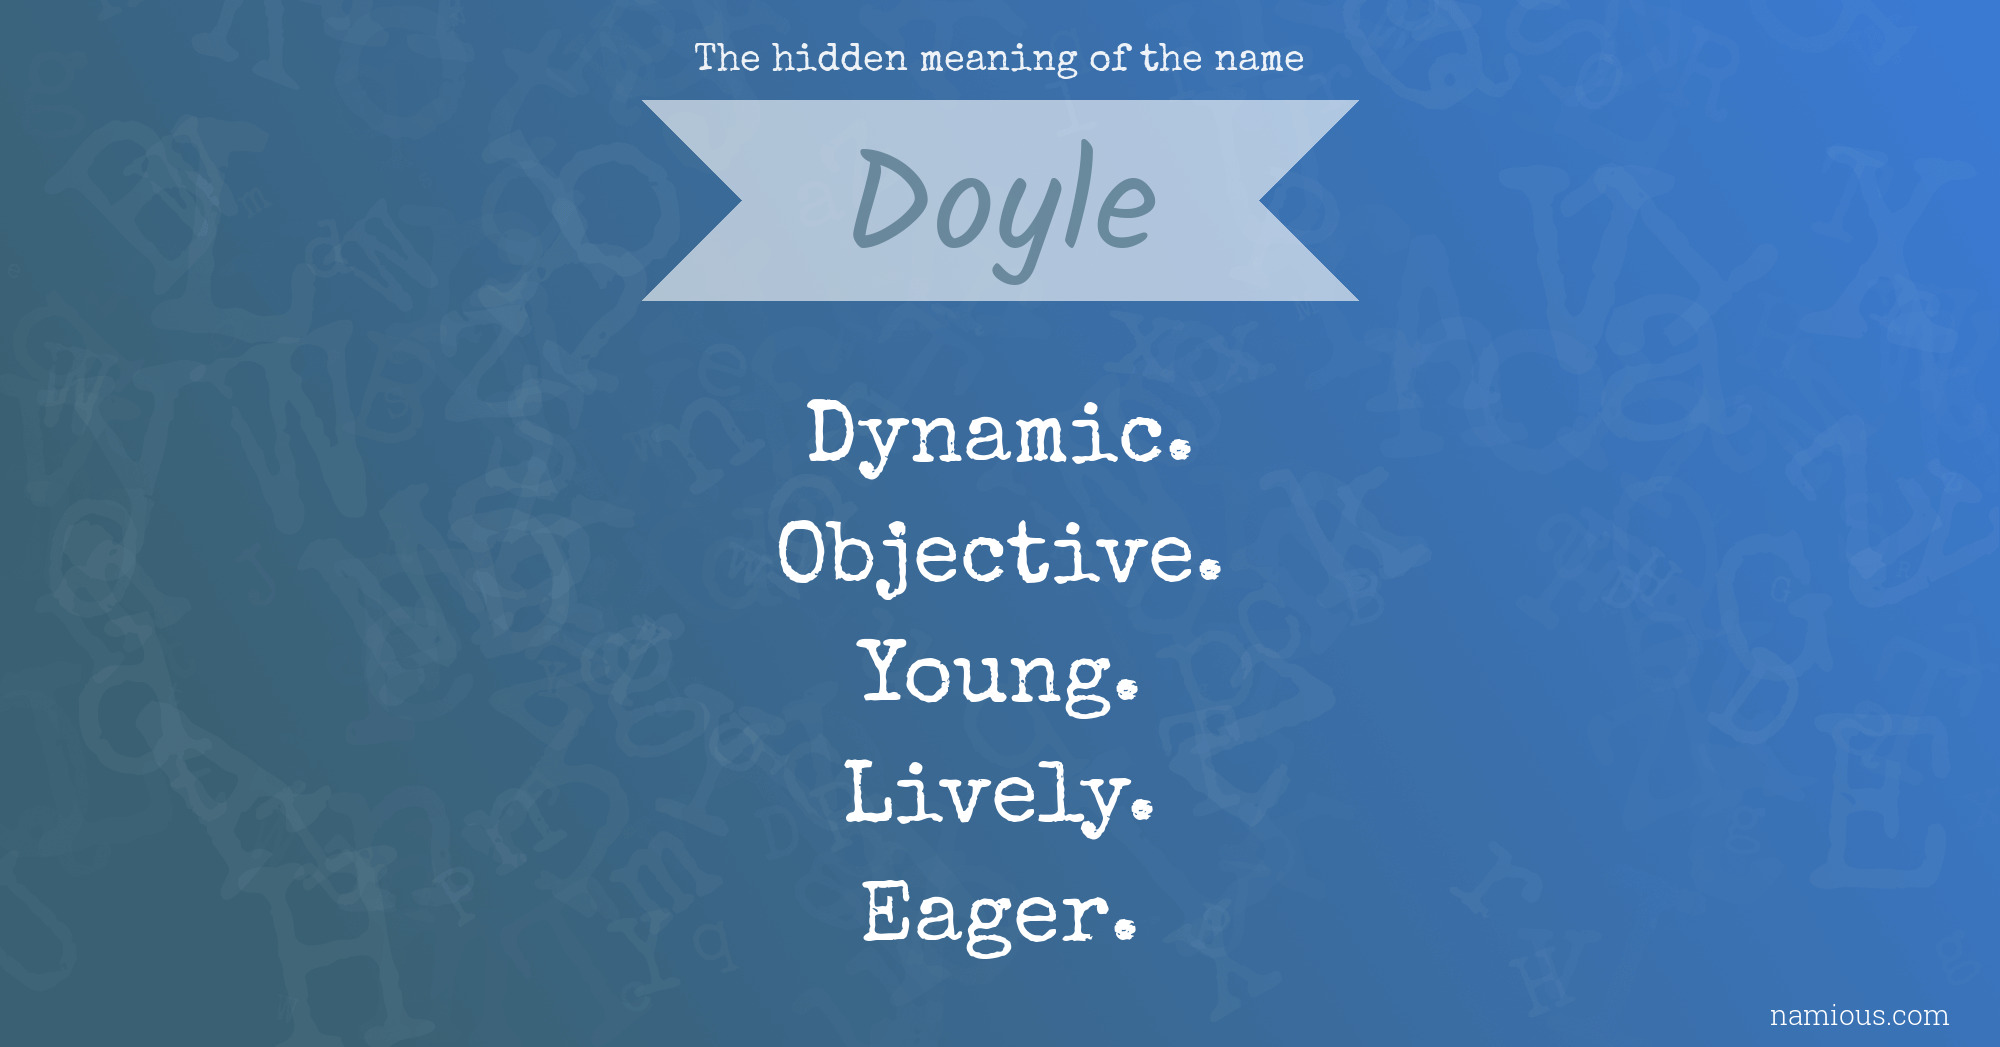 The hidden meaning of the name Doyle